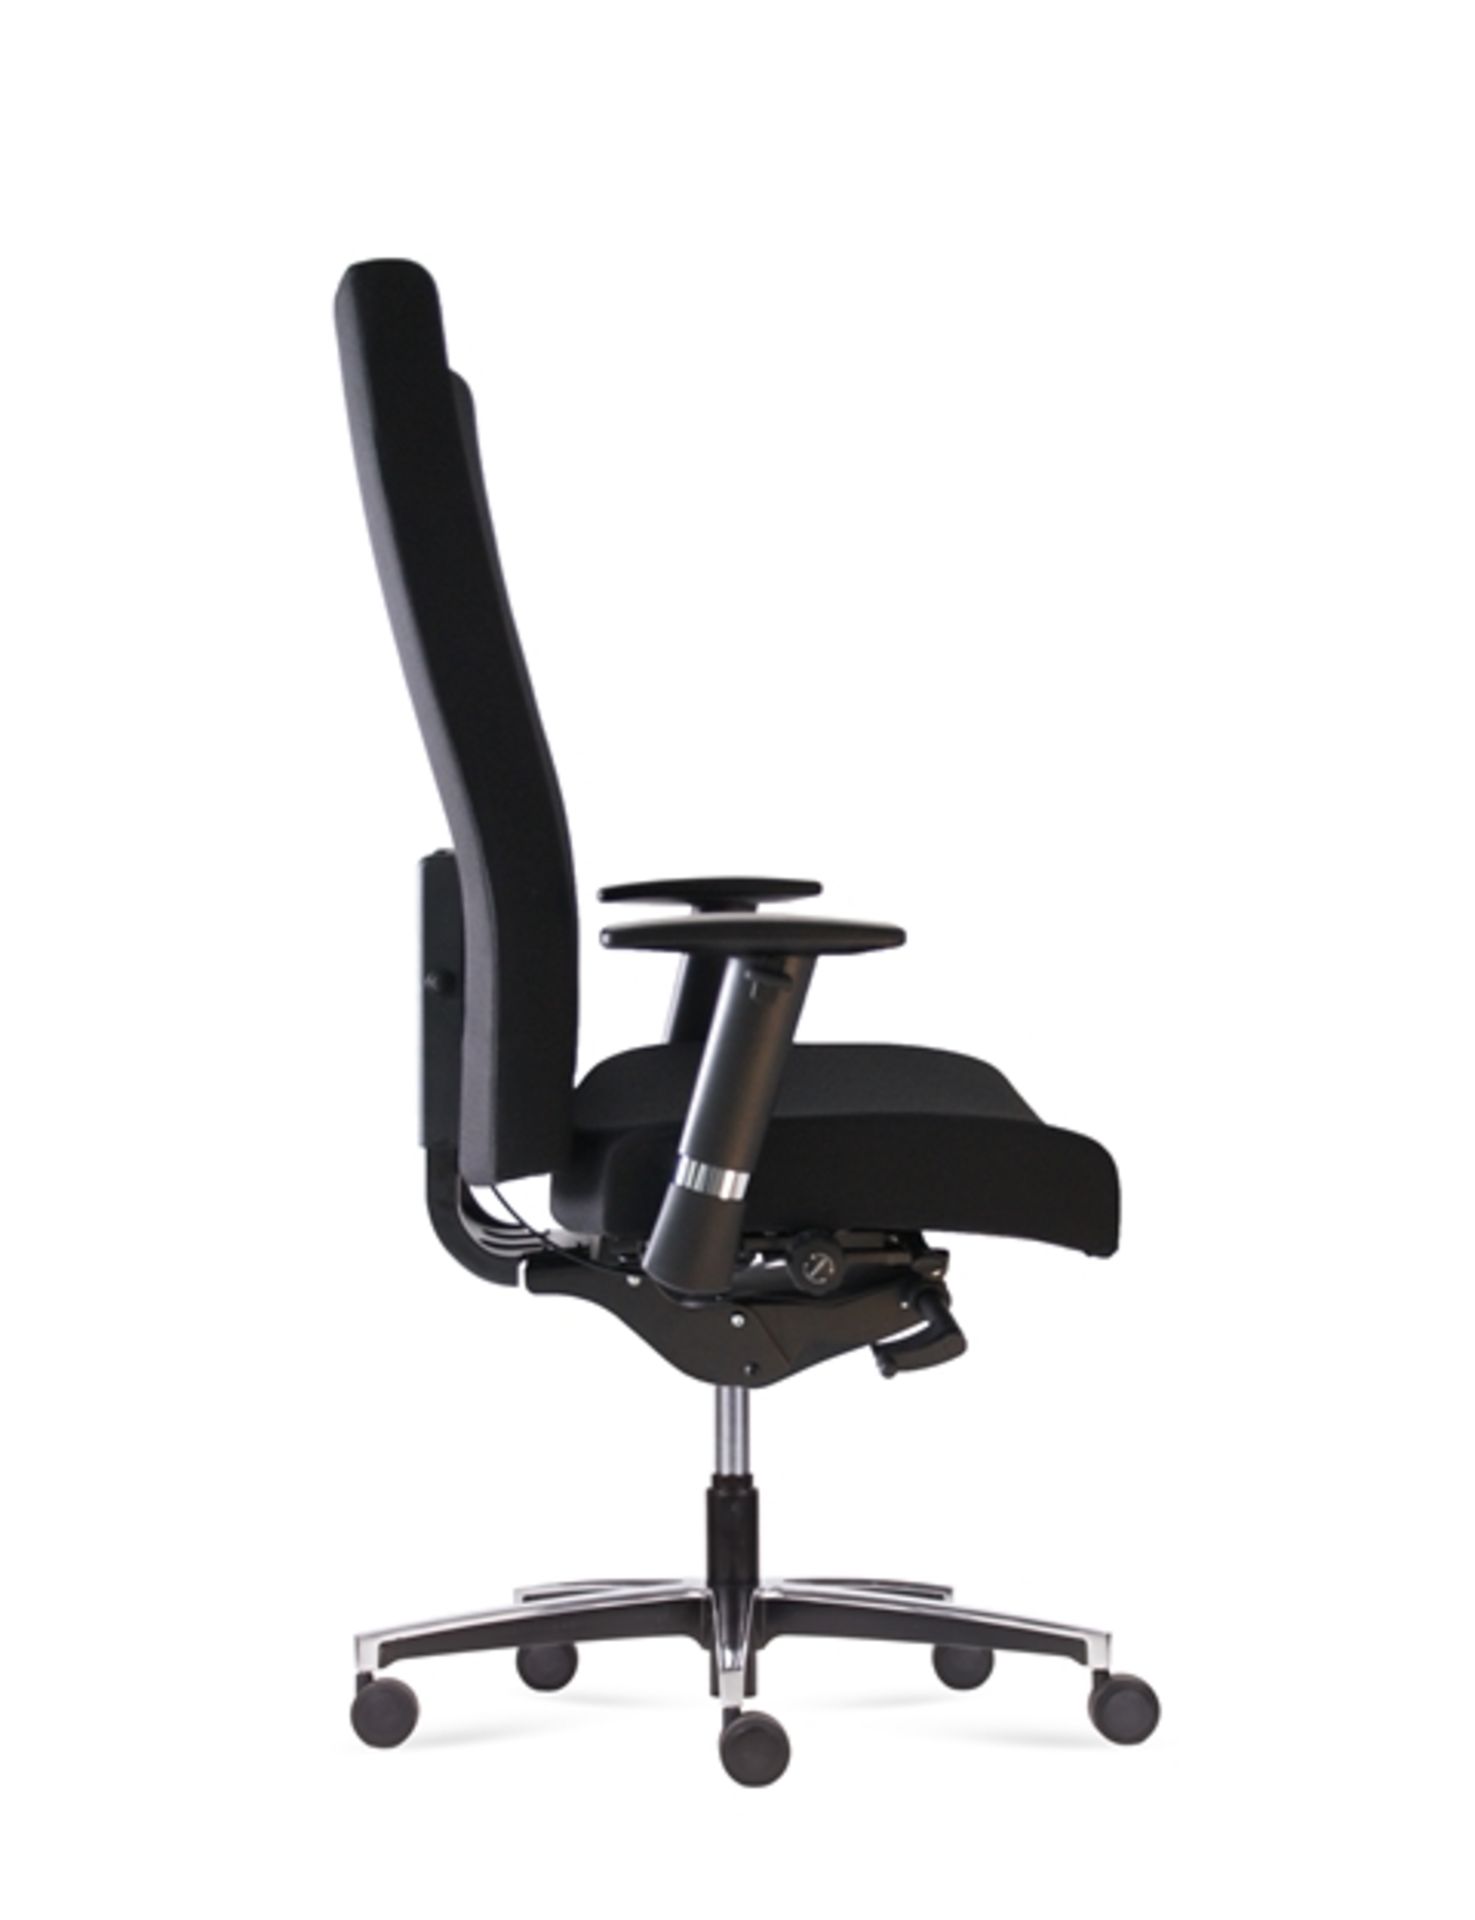 Unused ergonomic office chair in black (RRP £299) located in Stafford, viewing by appointment only - Image 3 of 6